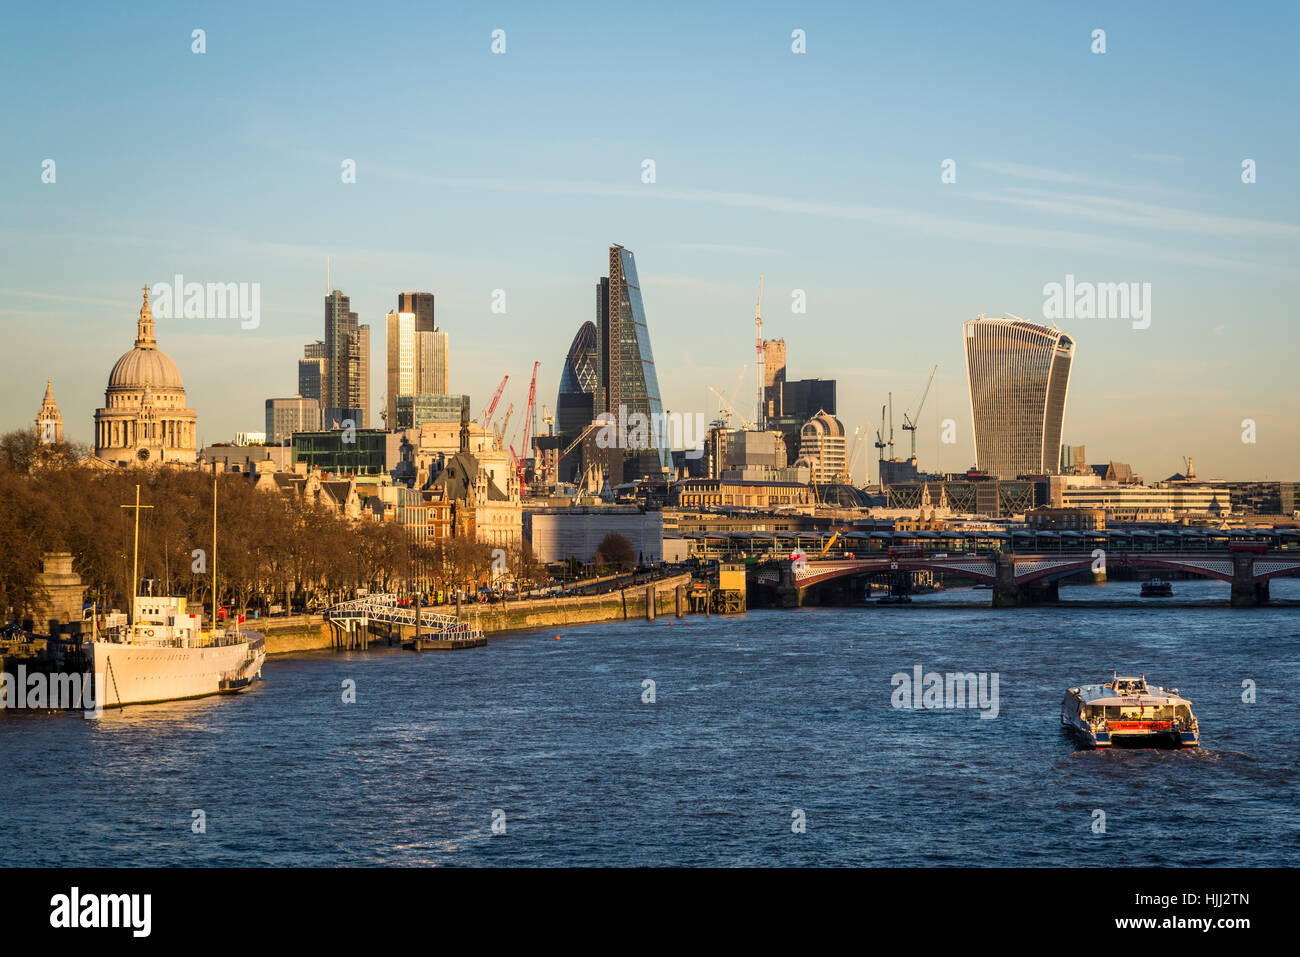 Skyline of the City of London including St Paul's Cathedral and the skyscrapers Cheese-grater and Walkie-talkie, London, UK Stock Photo